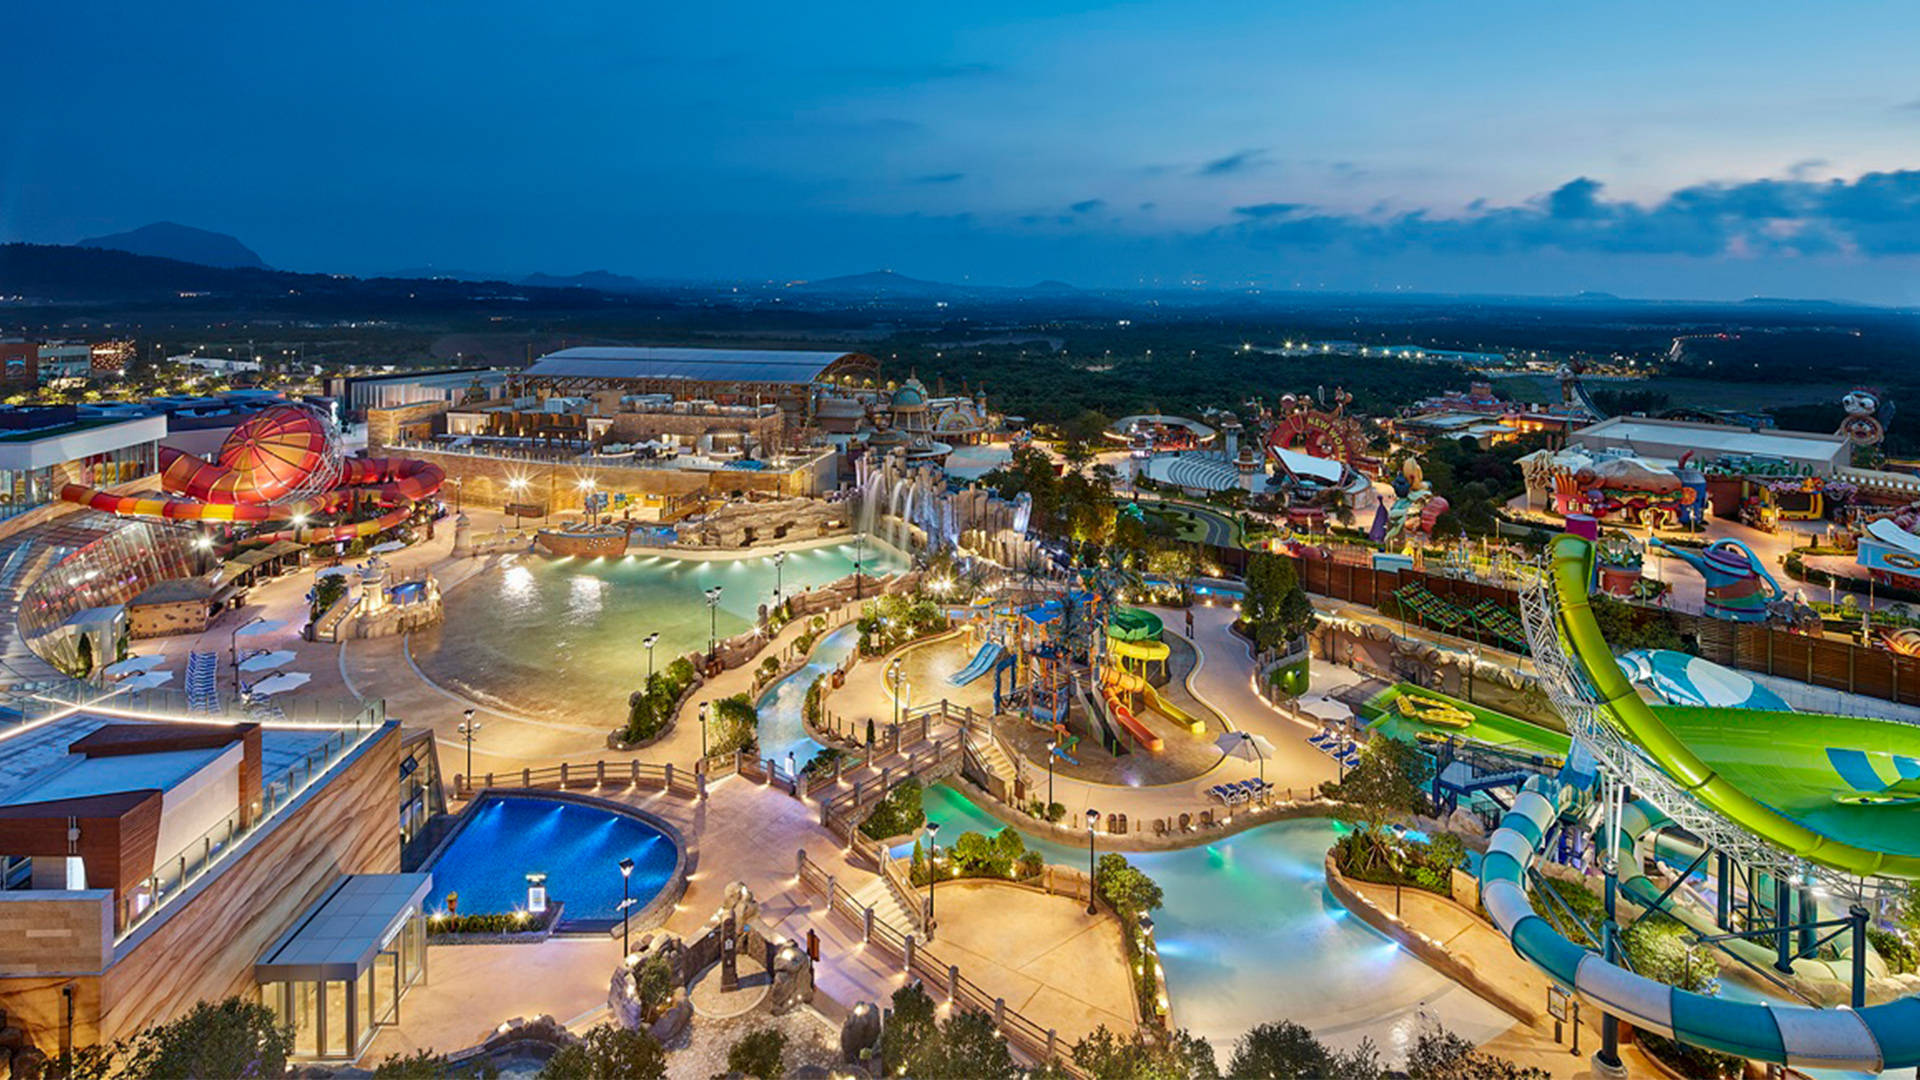 Enthralling view of a waterpark at Jeju Island Wallpaper